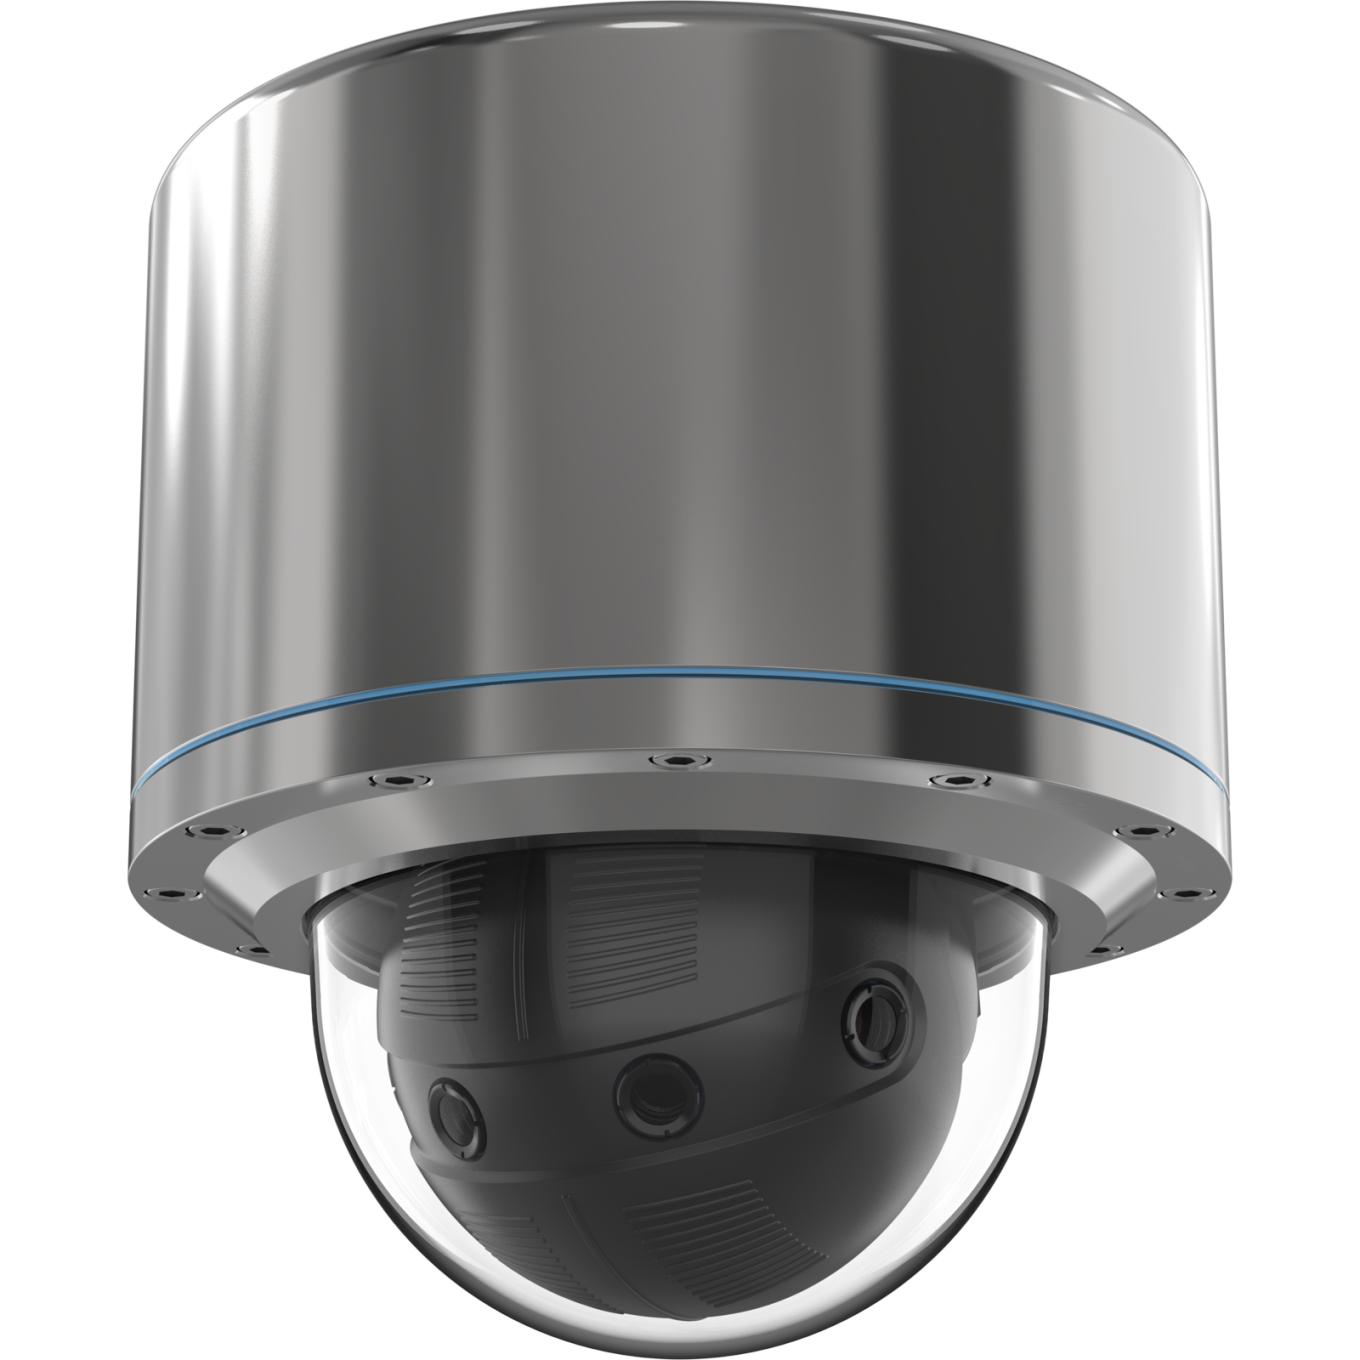 ExCam XF P3807 Explosion-Protected Panoramic Camera, viewed from its left angle